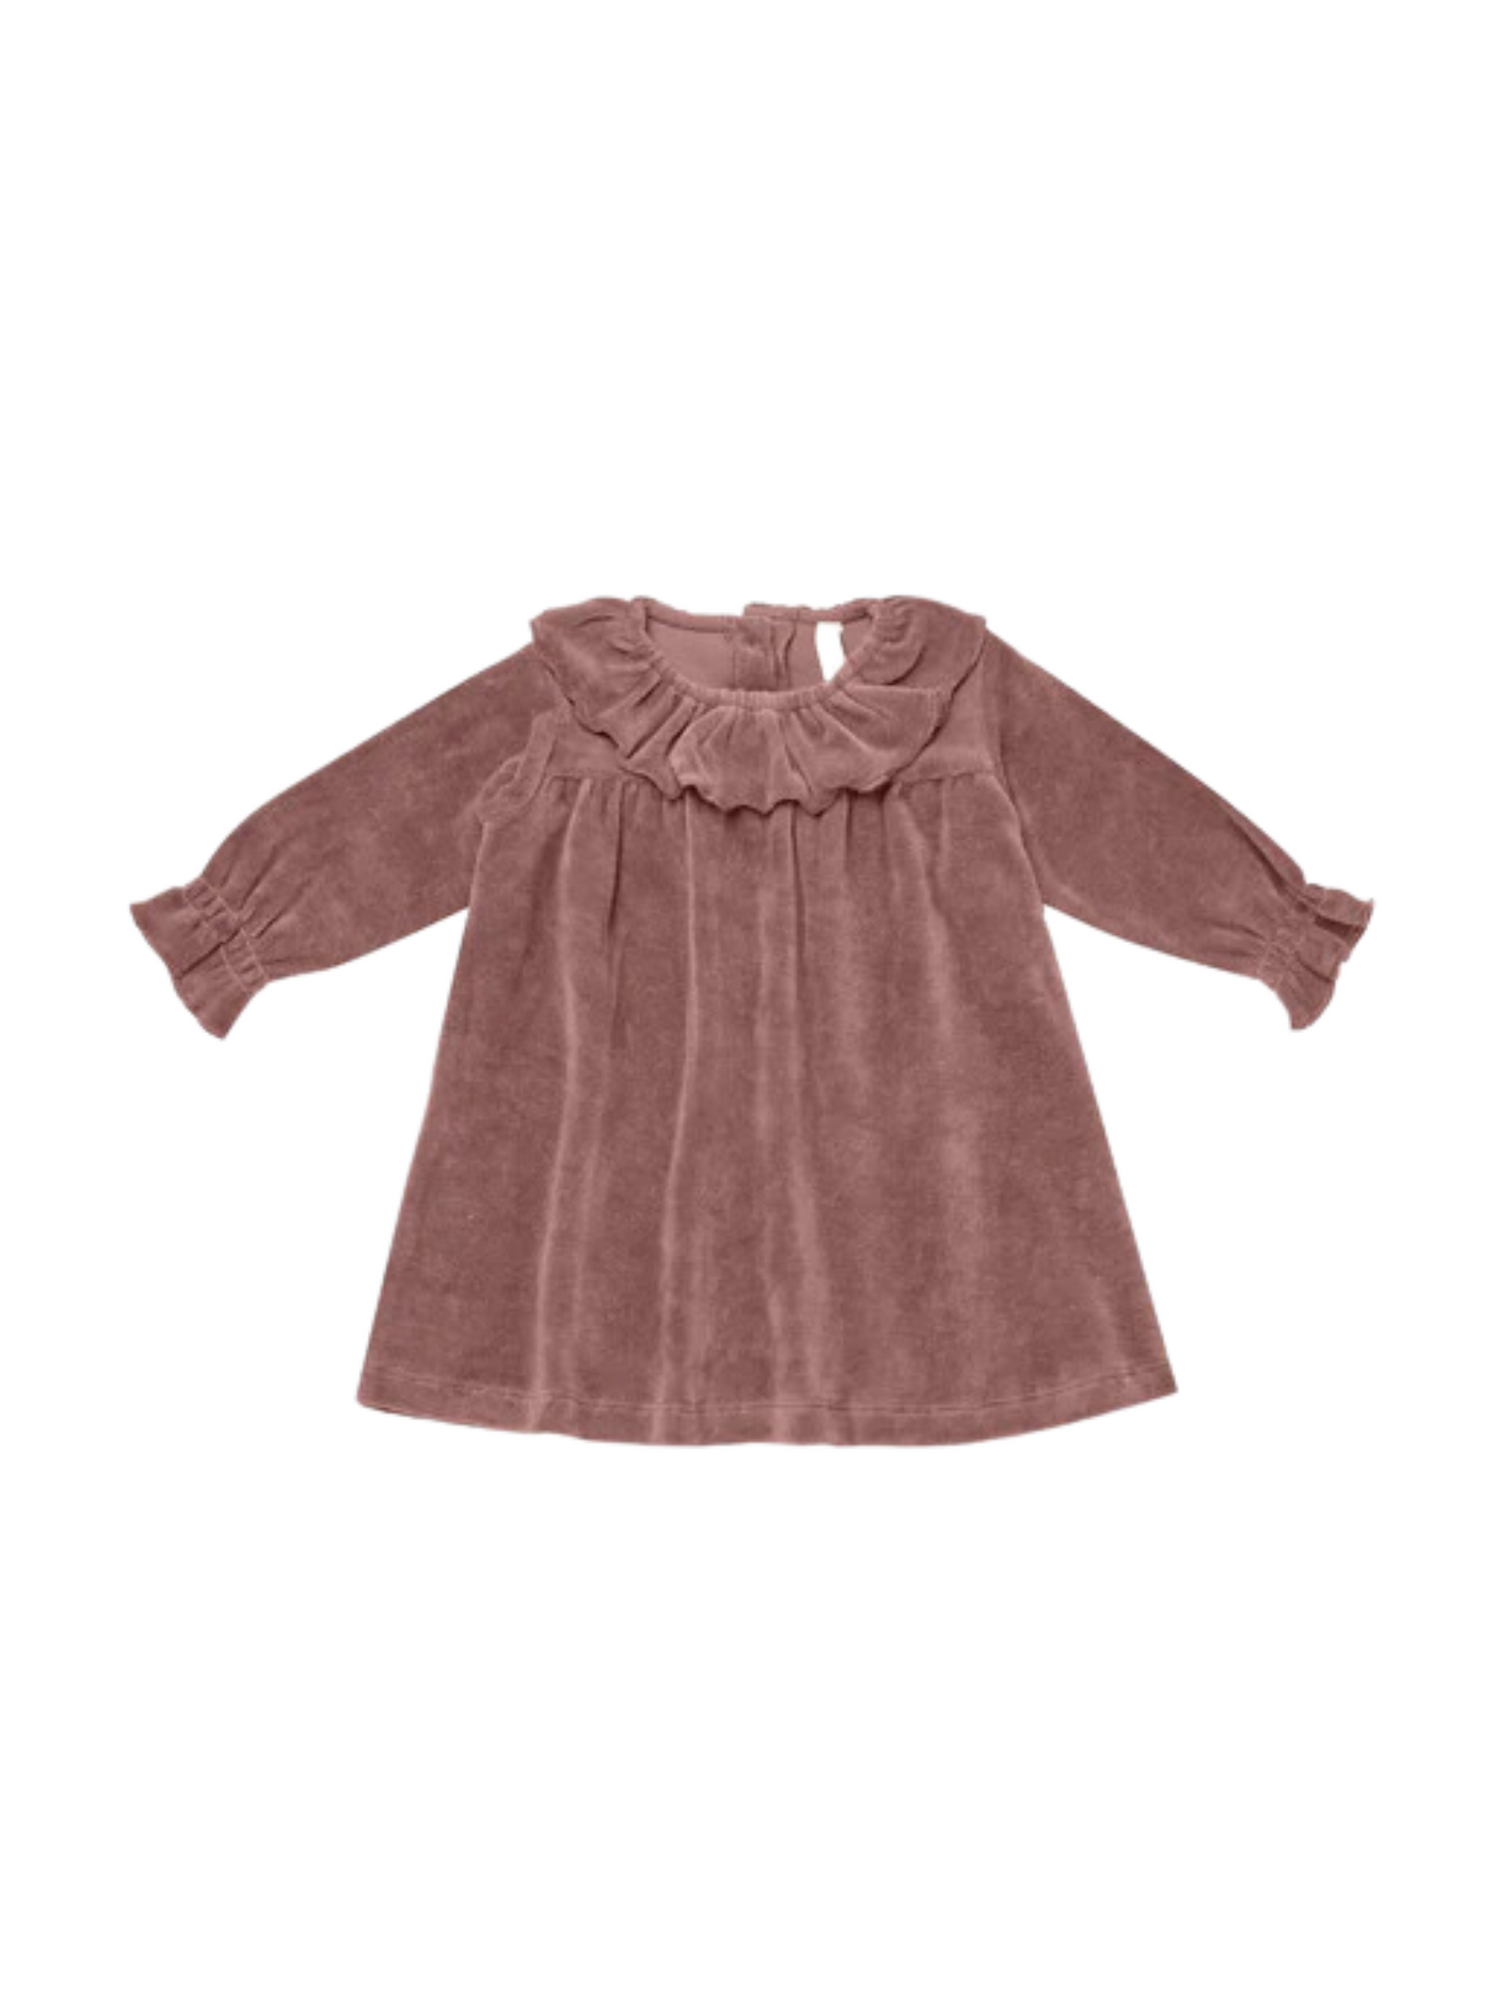 QUINCY MAE VELOUR DRESS IN FIG - THE LITTLE EAGLE BOUTIQUE